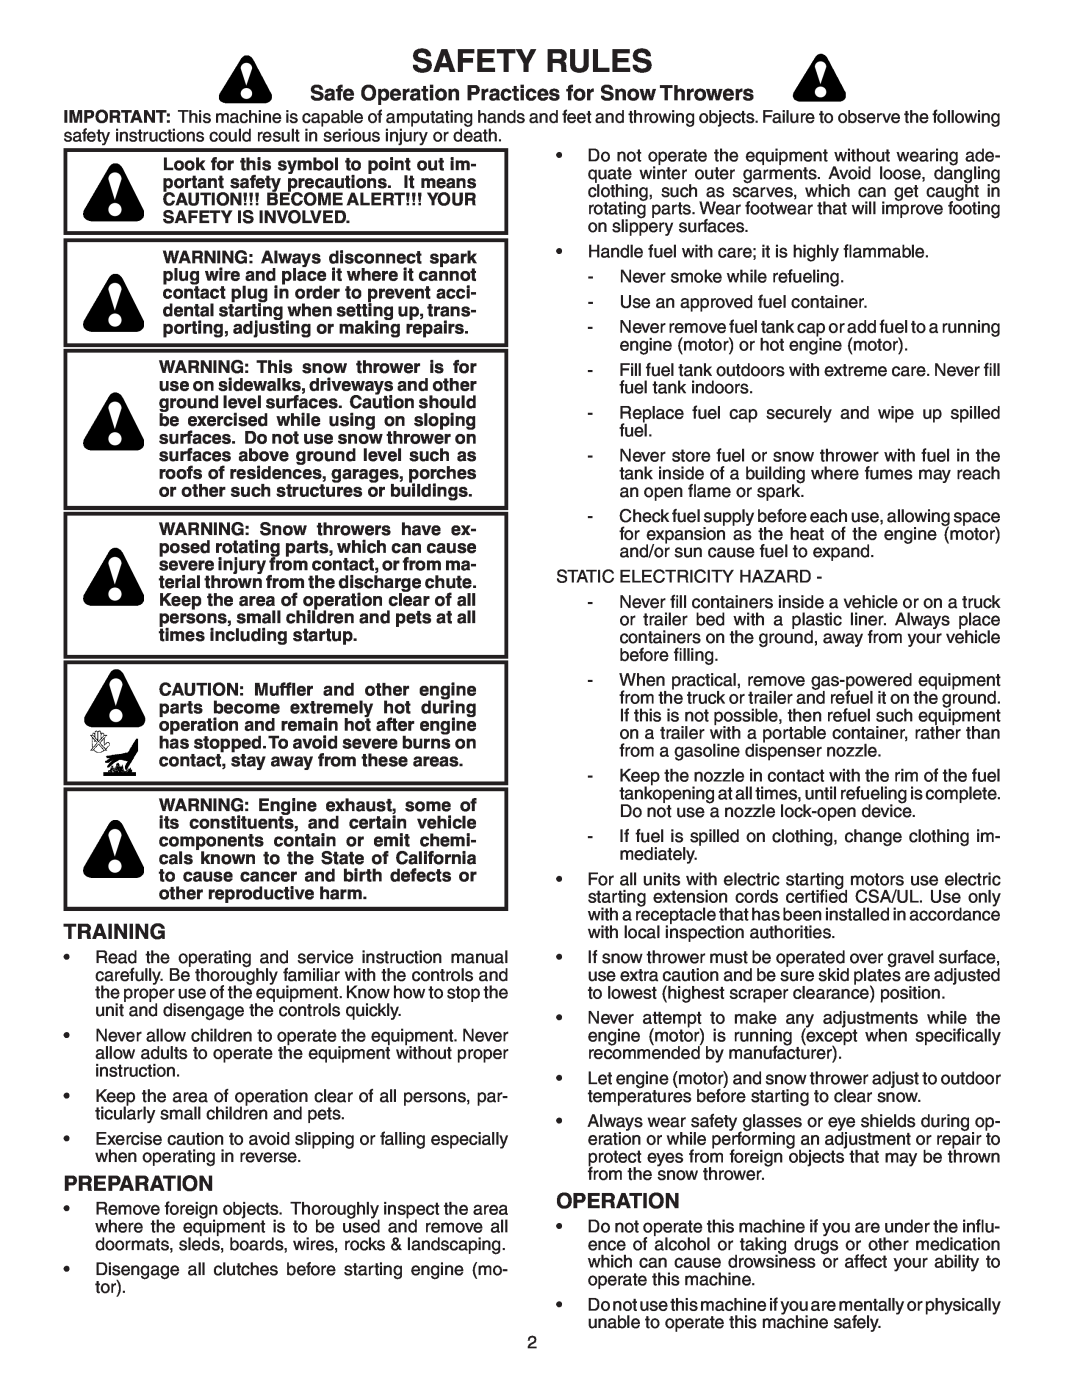 Poulan 187881 owner manual Safety Rules, Safe Operation Practices for Snow Throwers, Training, Preparation 